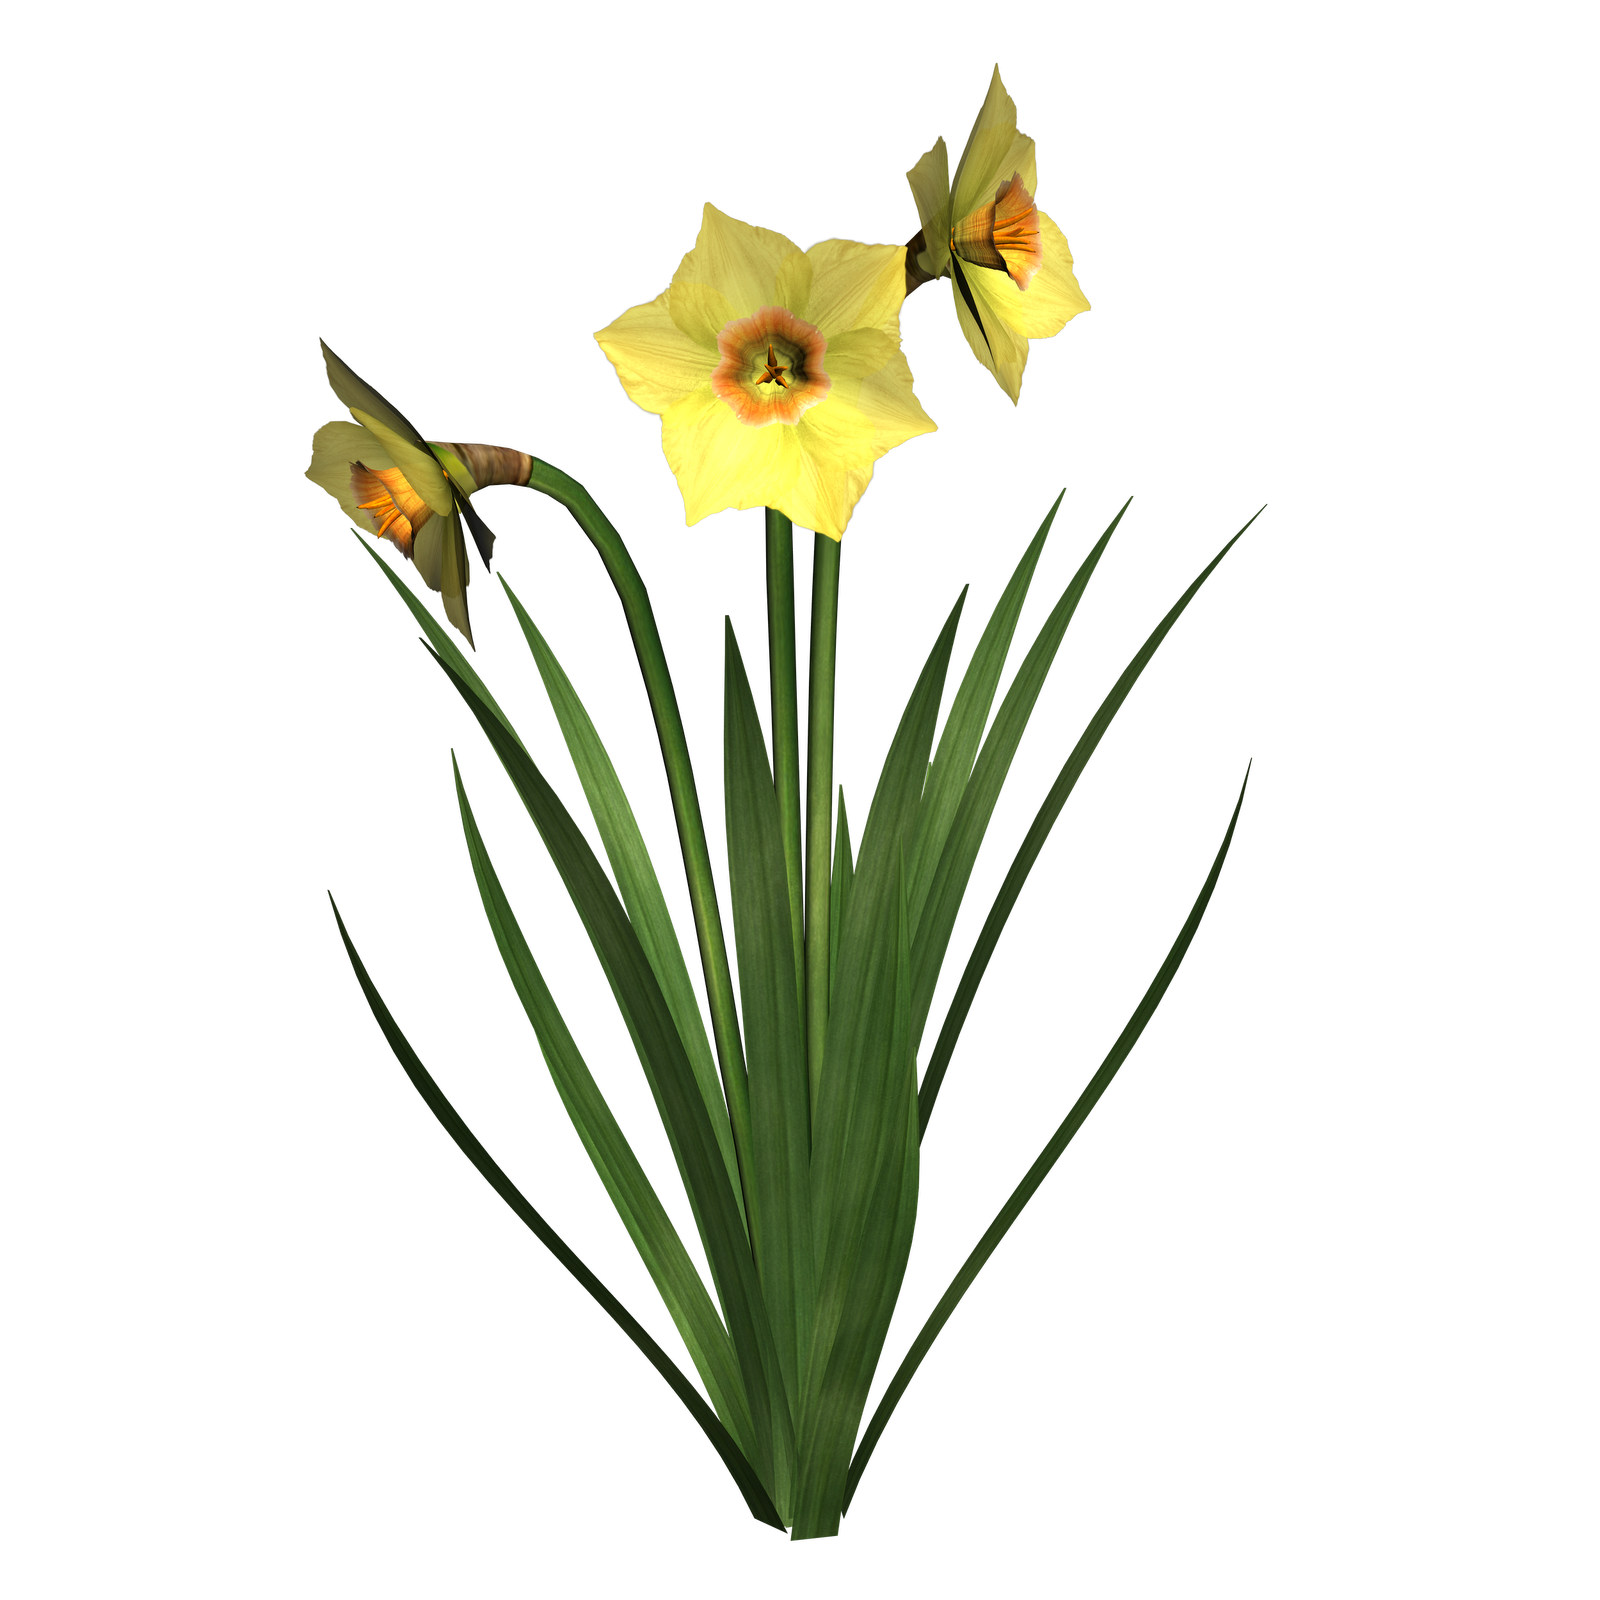 Daffodil Cliparts - Add a Splash of Color to Your Designs